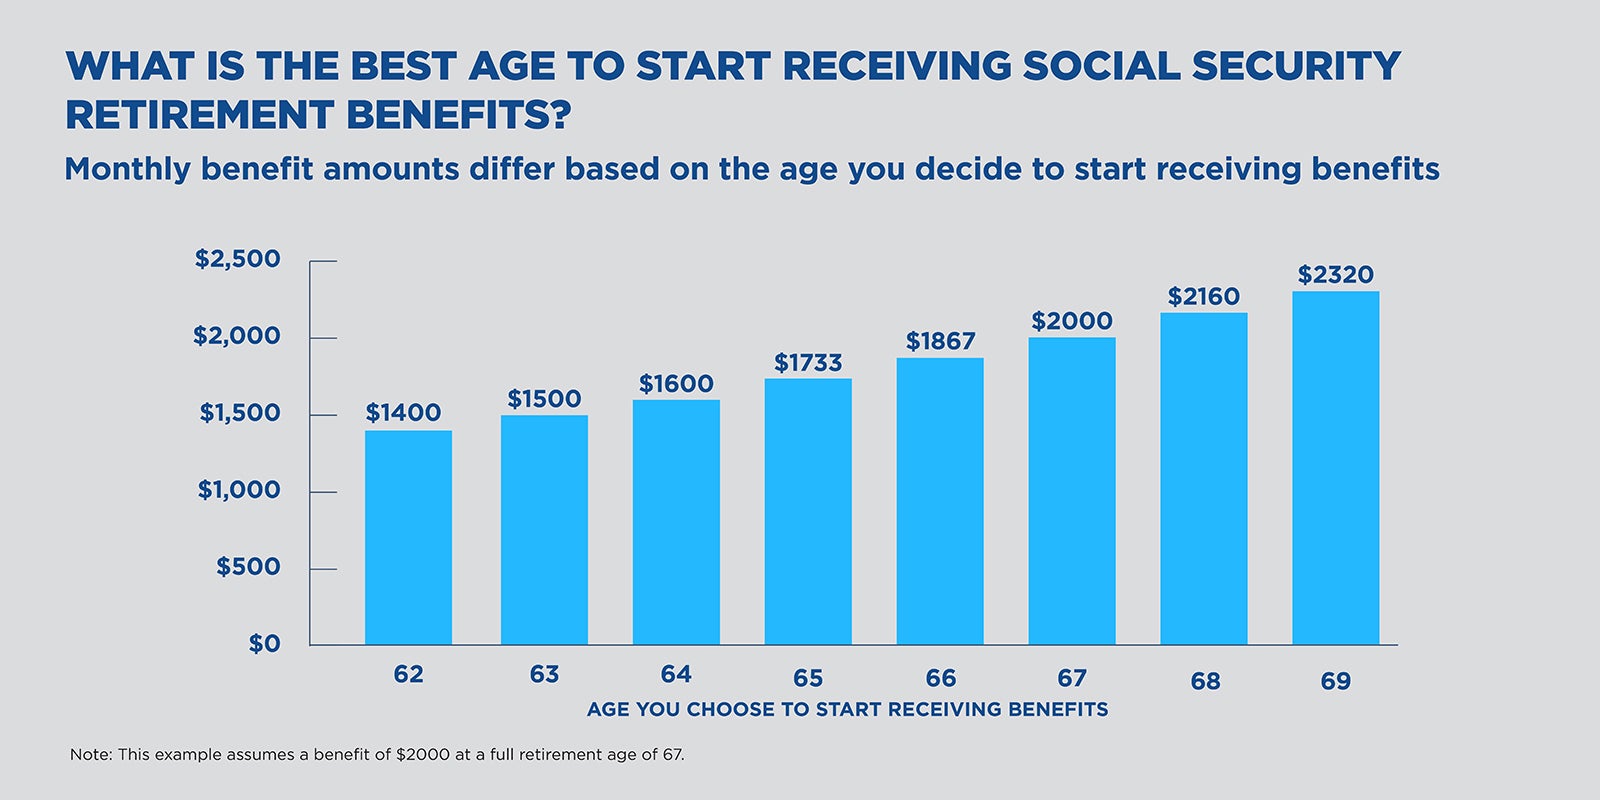 Chart showing what is the best age to start receiving social security retirement benefits.